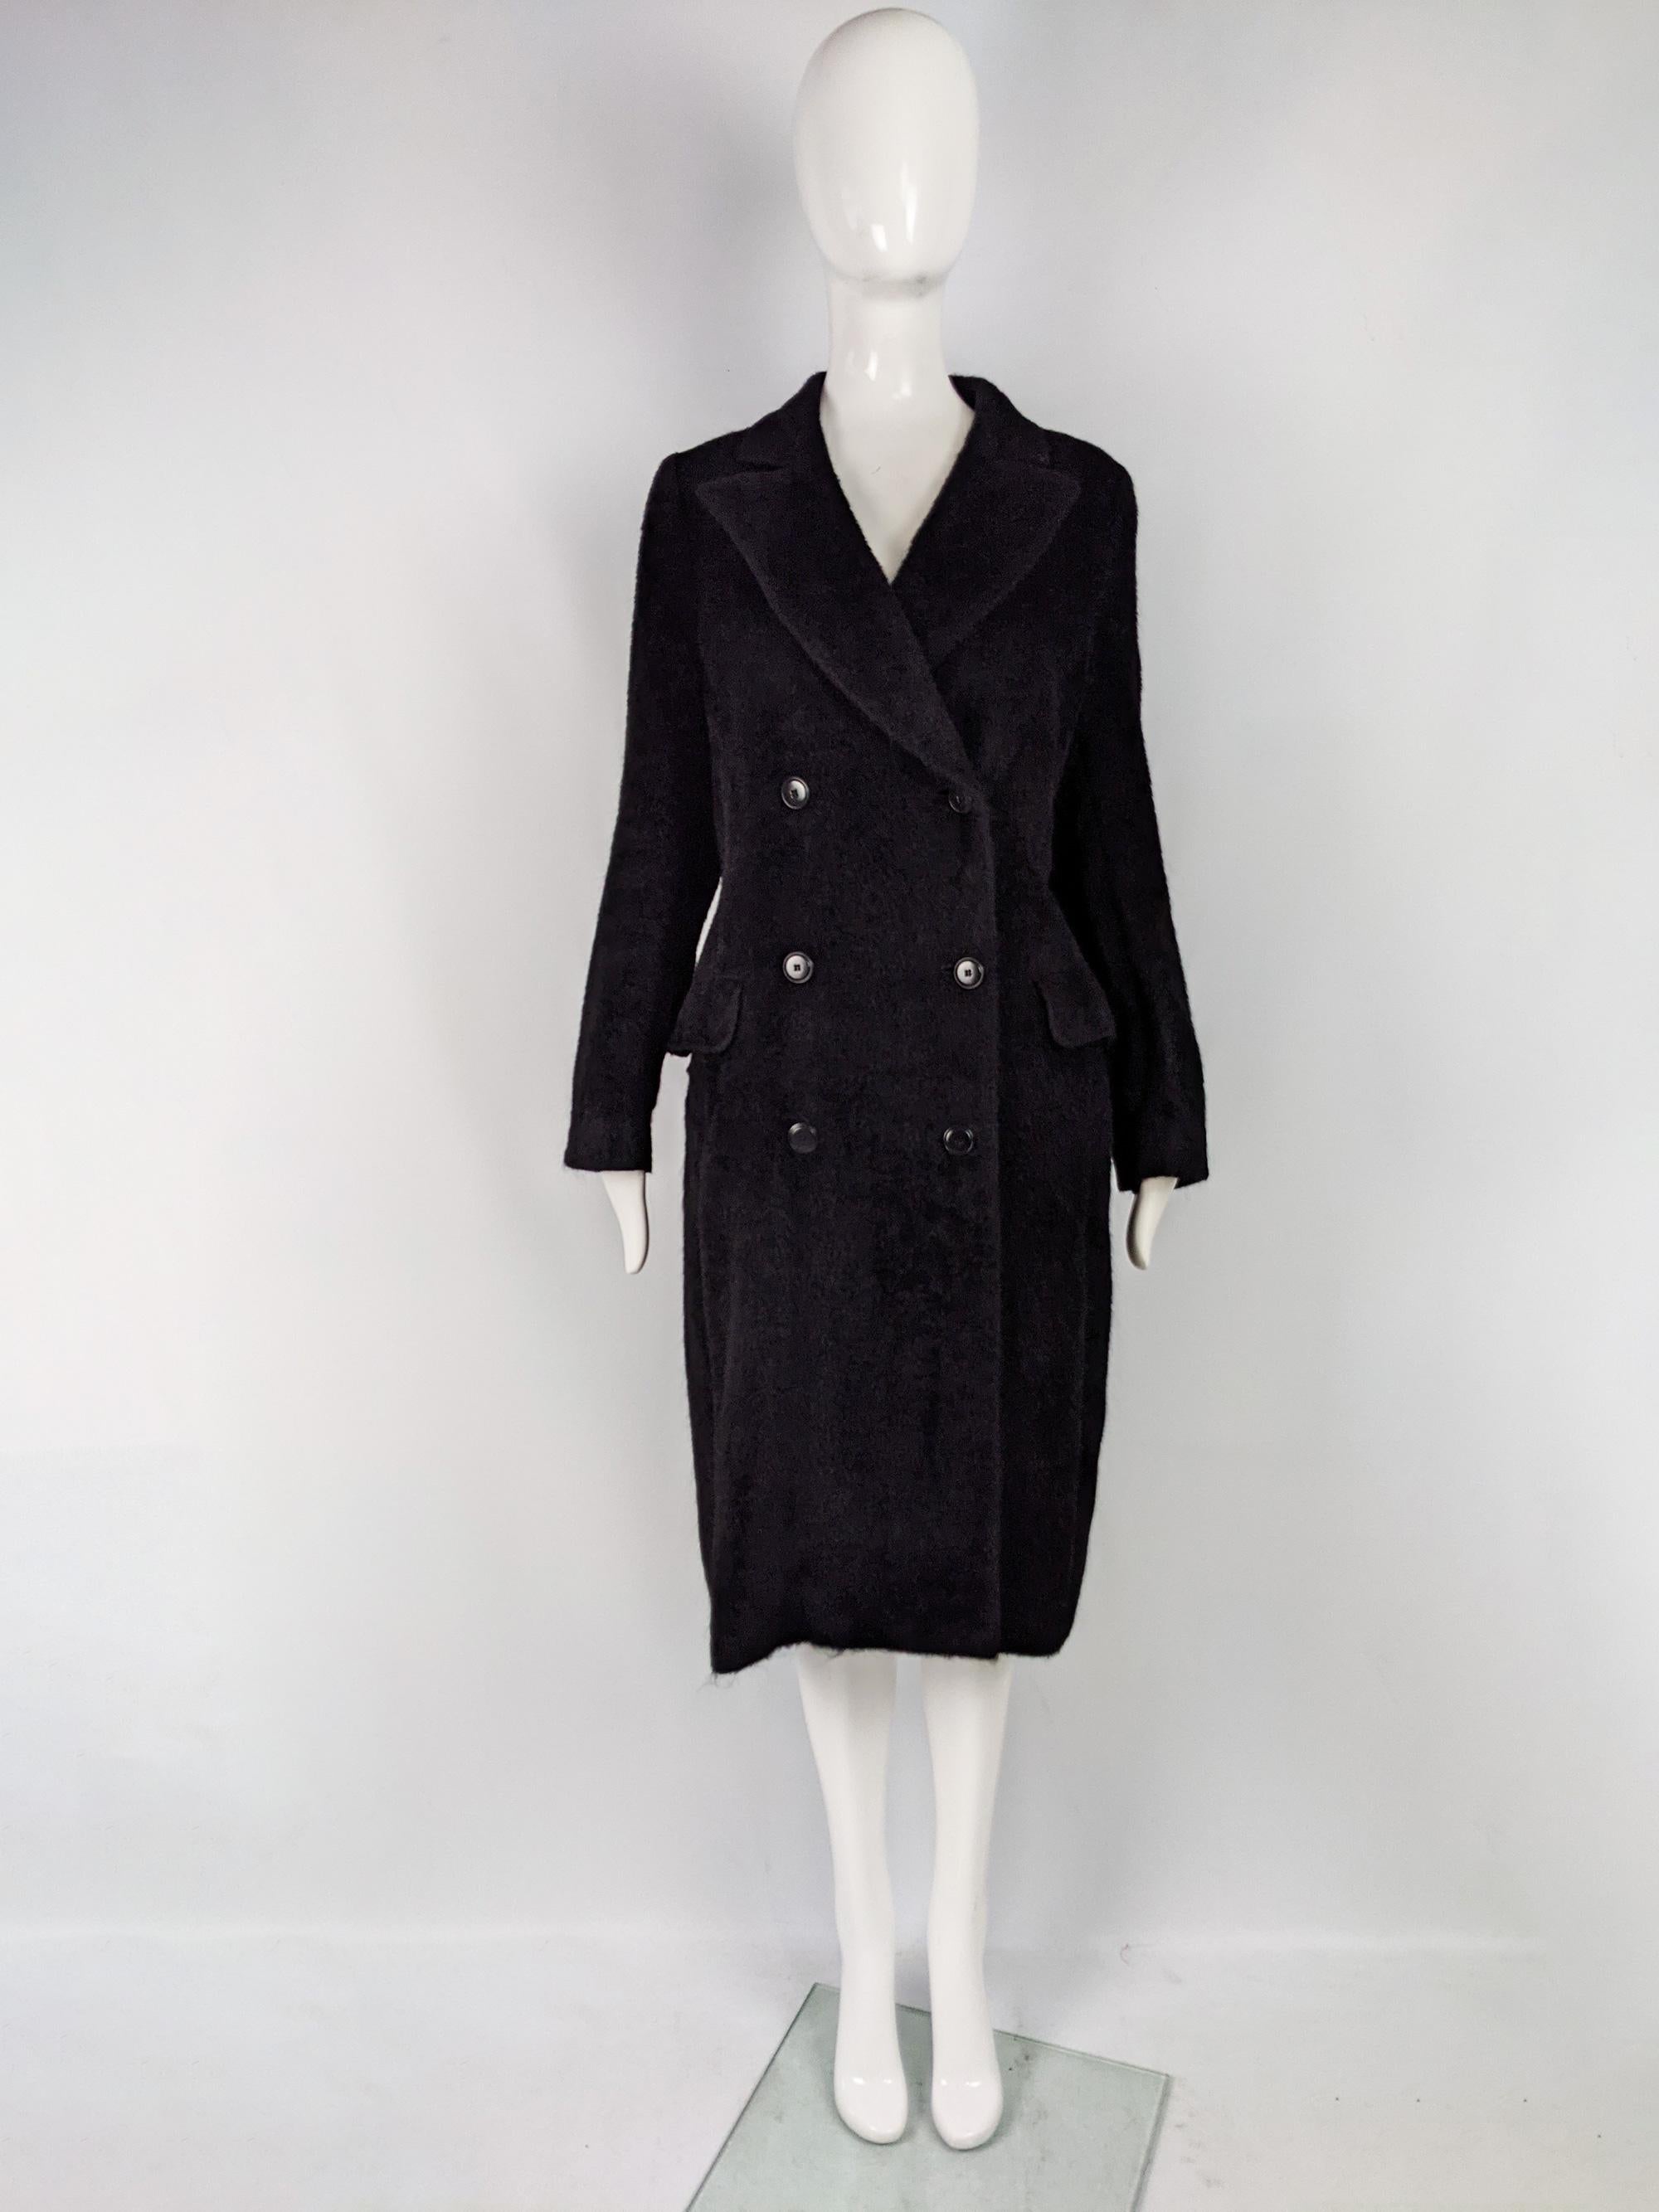 A chic vintage womens coat from the 90s by luxury Italian fashion house, Max Mara. In a black alpaca wool with double breasted buttons and beautiful peaked lapels for a timeless look. 

Size: Marked US 10 / F 42 / GB 12 / I 44. Please check